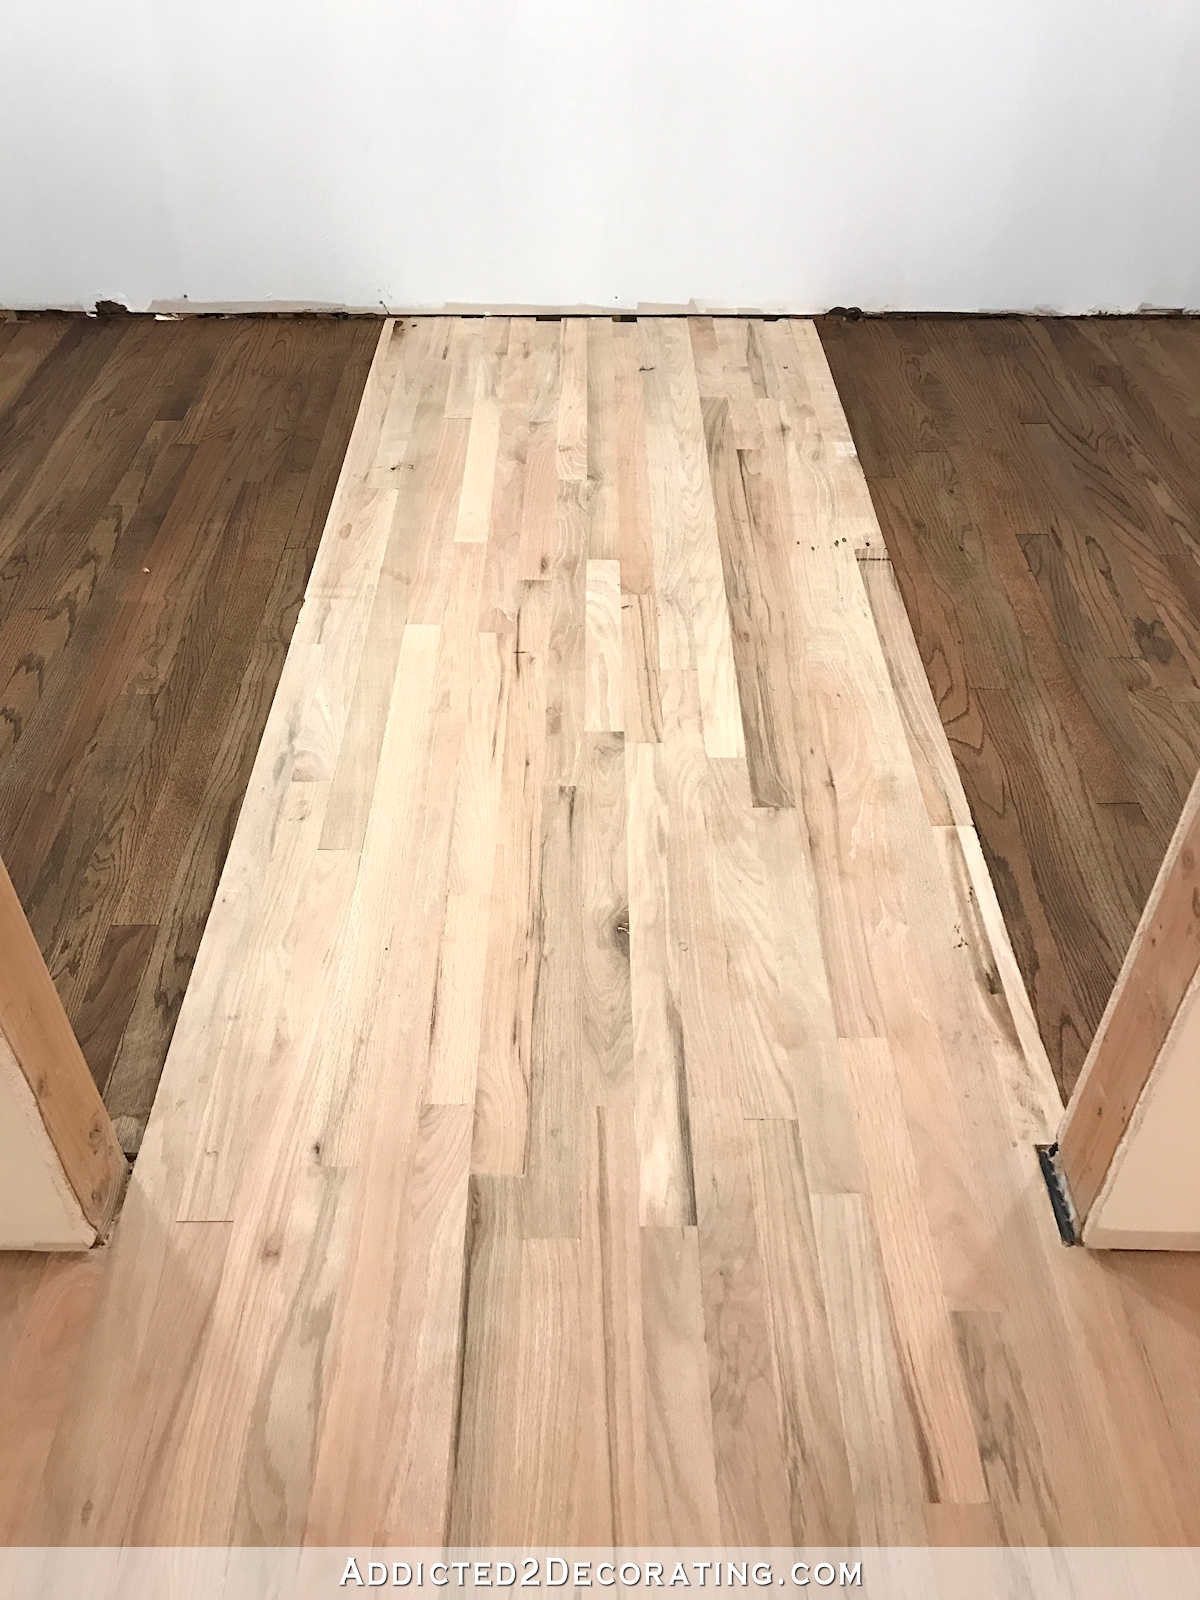 10 Recommended Hardwood Floor Stain Options 2024 free download hardwood floor stain options of adventures in staining my red oak hardwood floors products process regarding staining red oak hardwood floors 11 stain on left and right sides of the